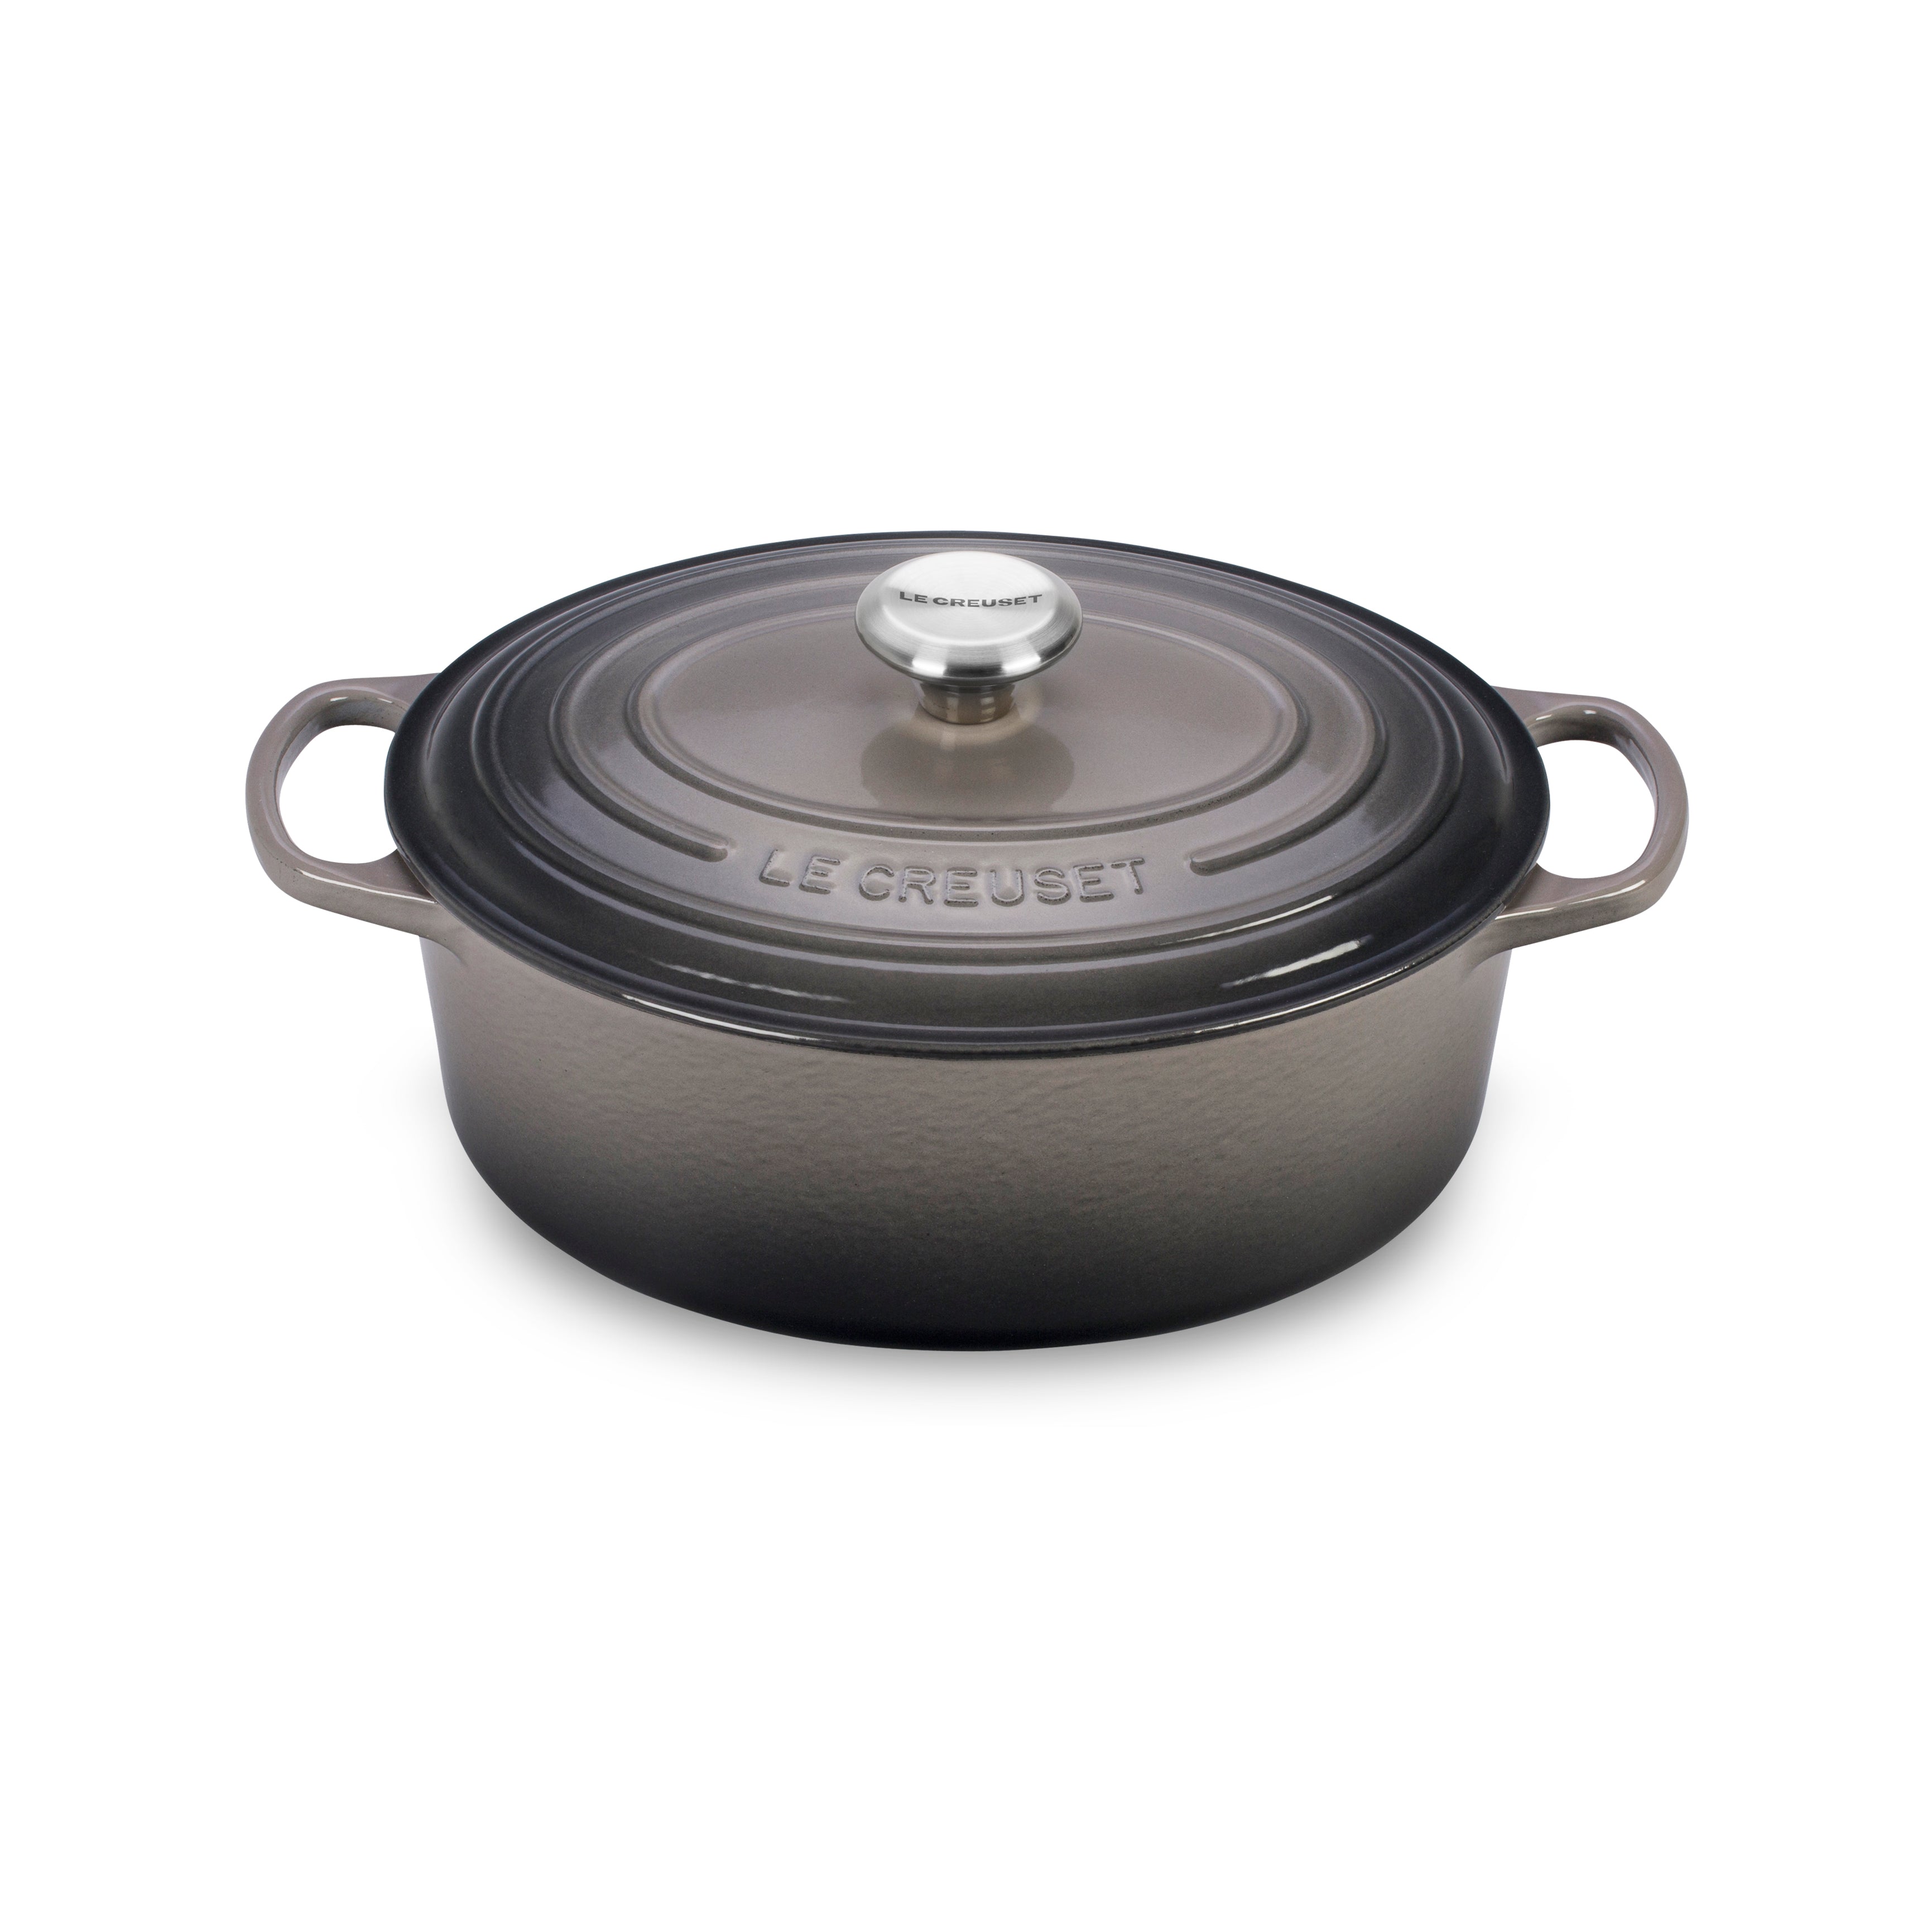 Neo 5qt Cast Iron Oval Cov Dutch Oven, Oyster - Bed Bath & Beyond - 35255070